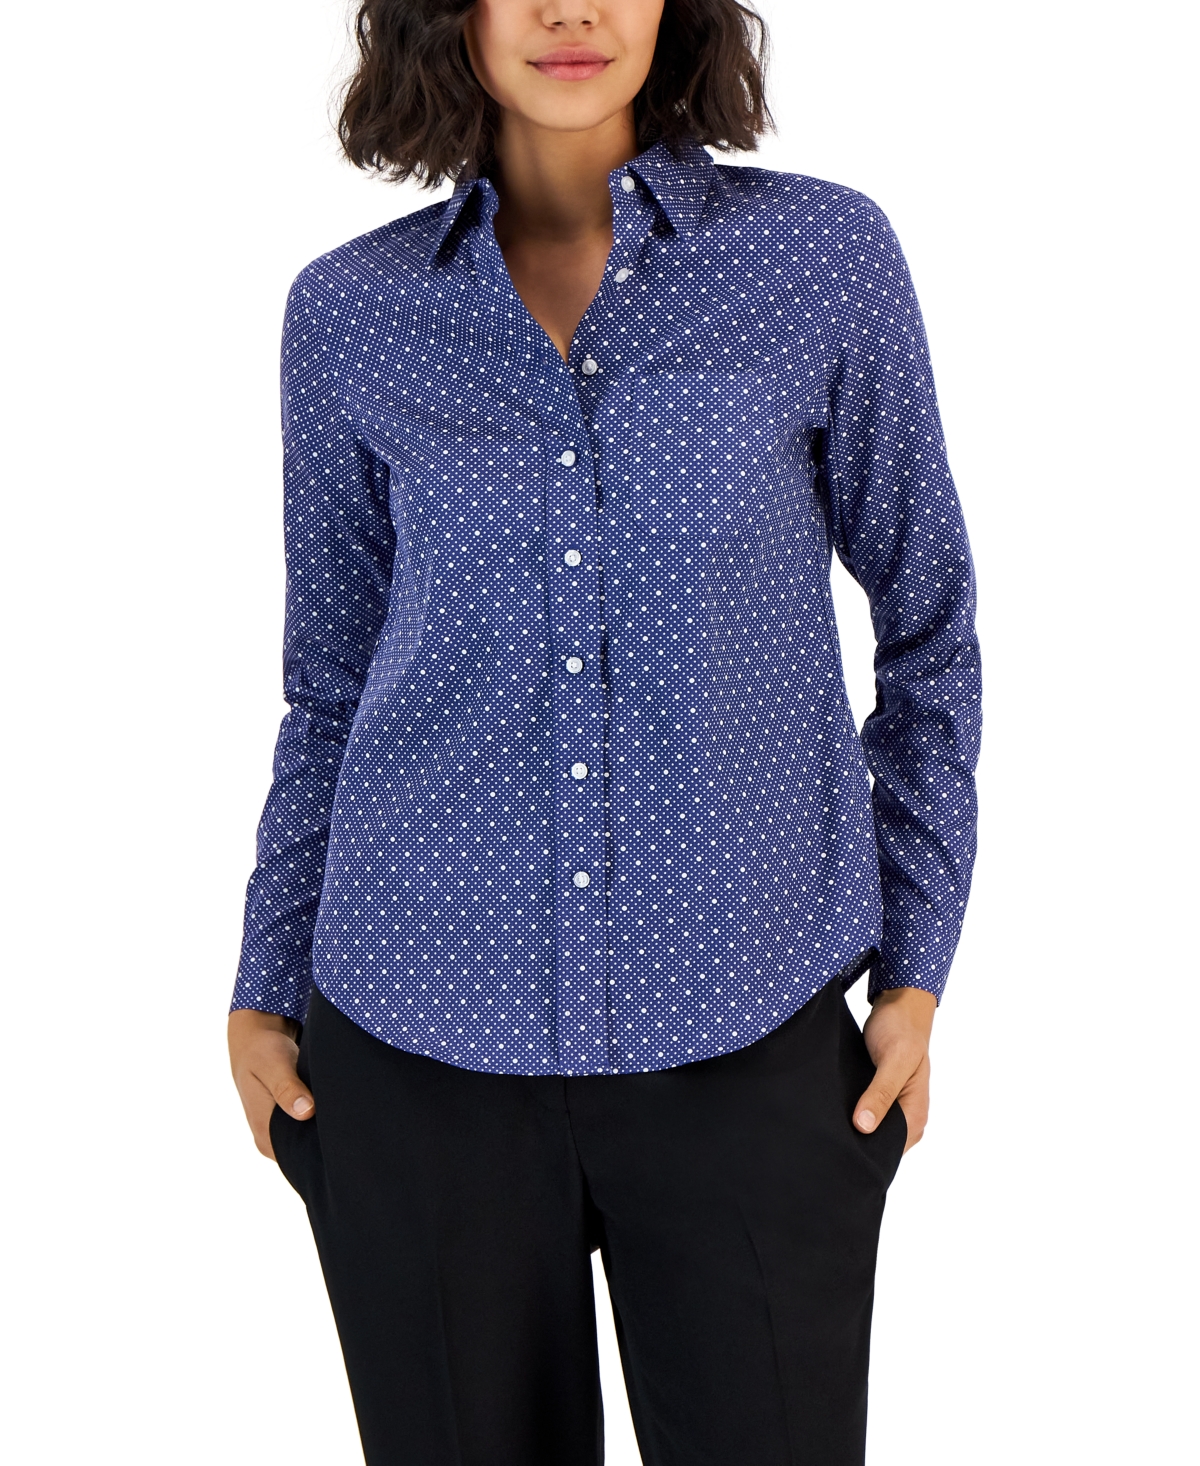 Women's Easy Care Button Up Long Sleeve Blouse - Blue-White